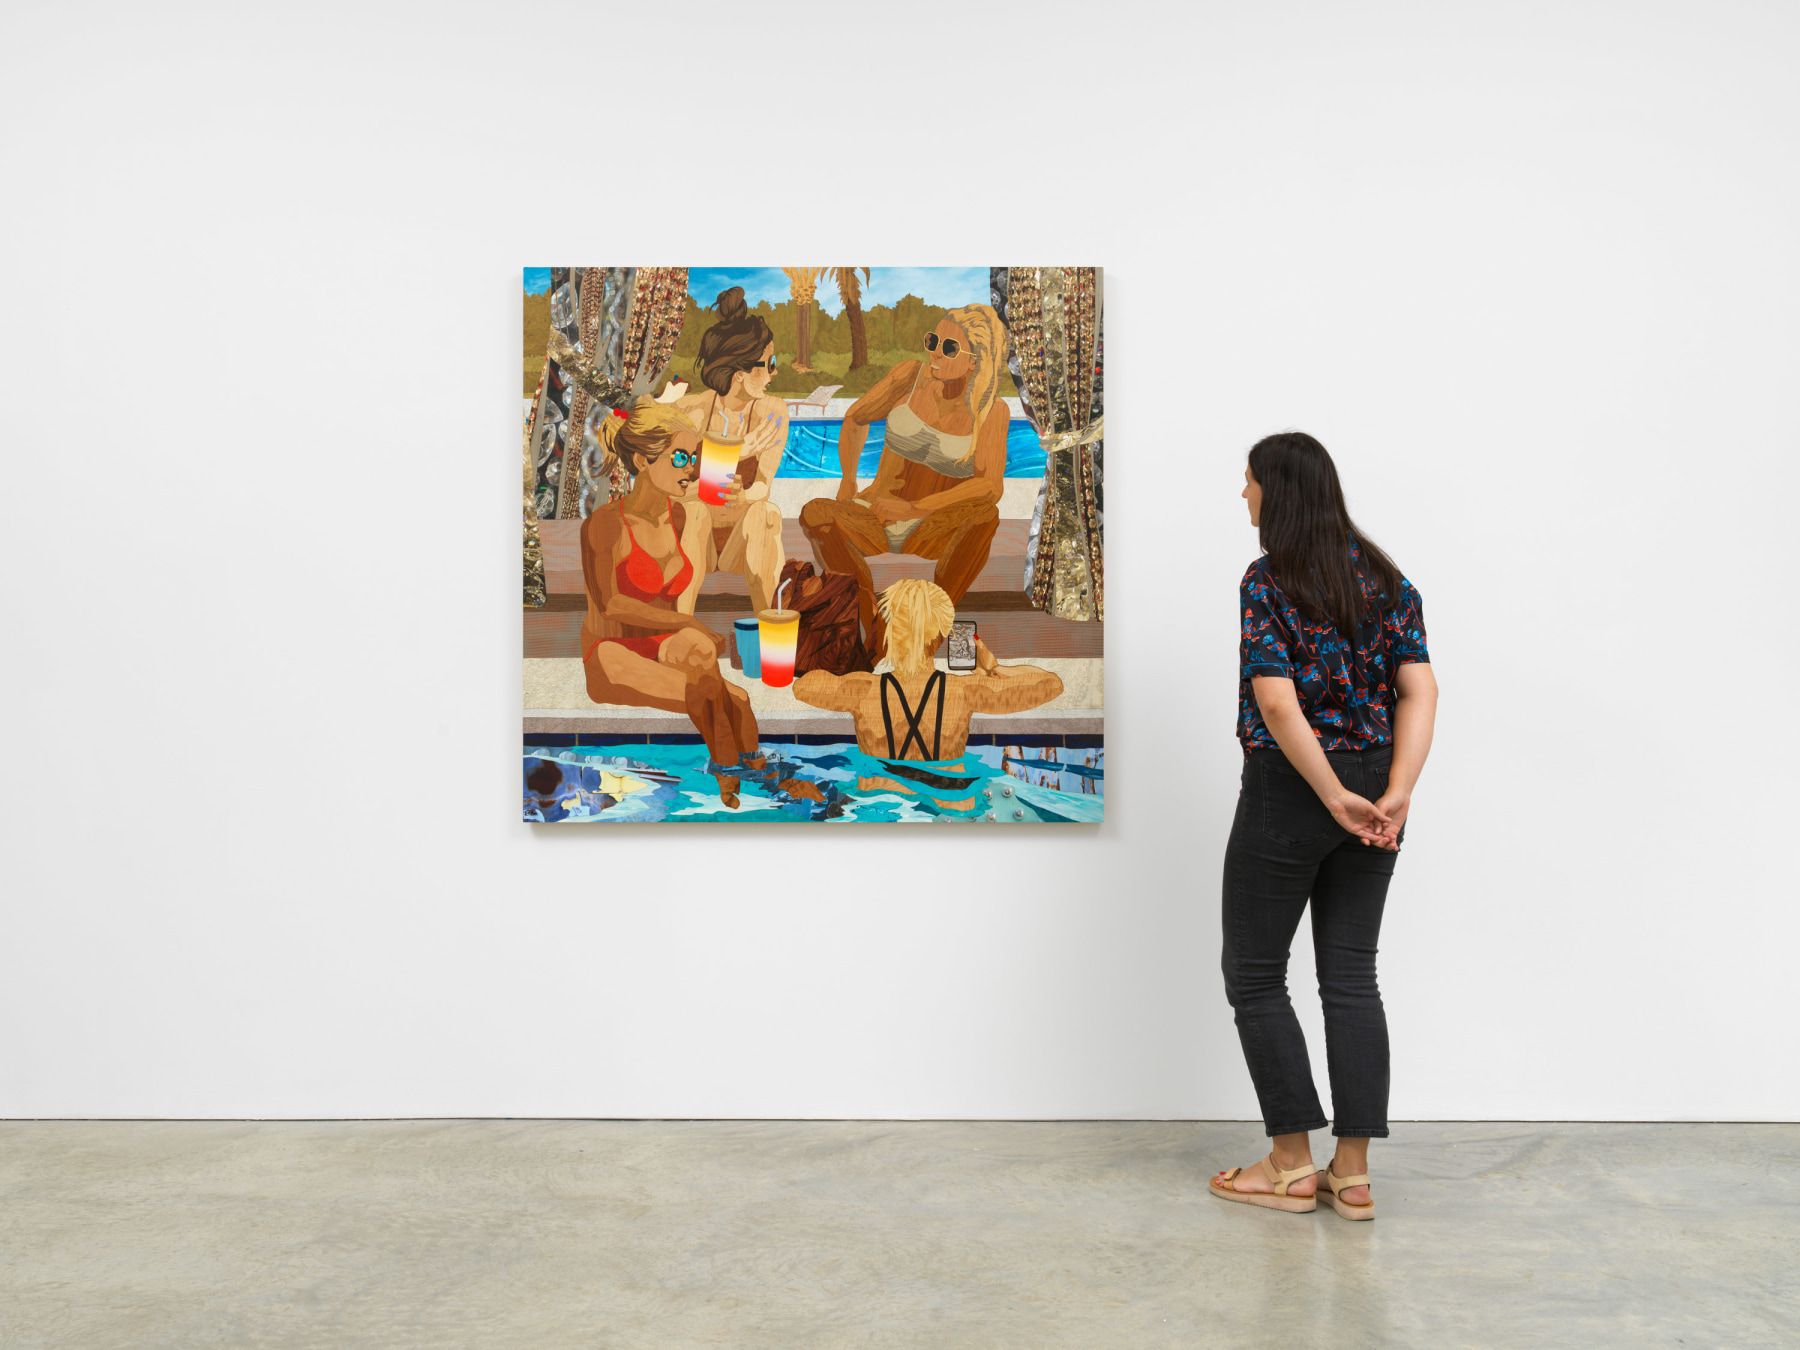 woman looking at an artwork depicting women in bathing suits lounging at a pool